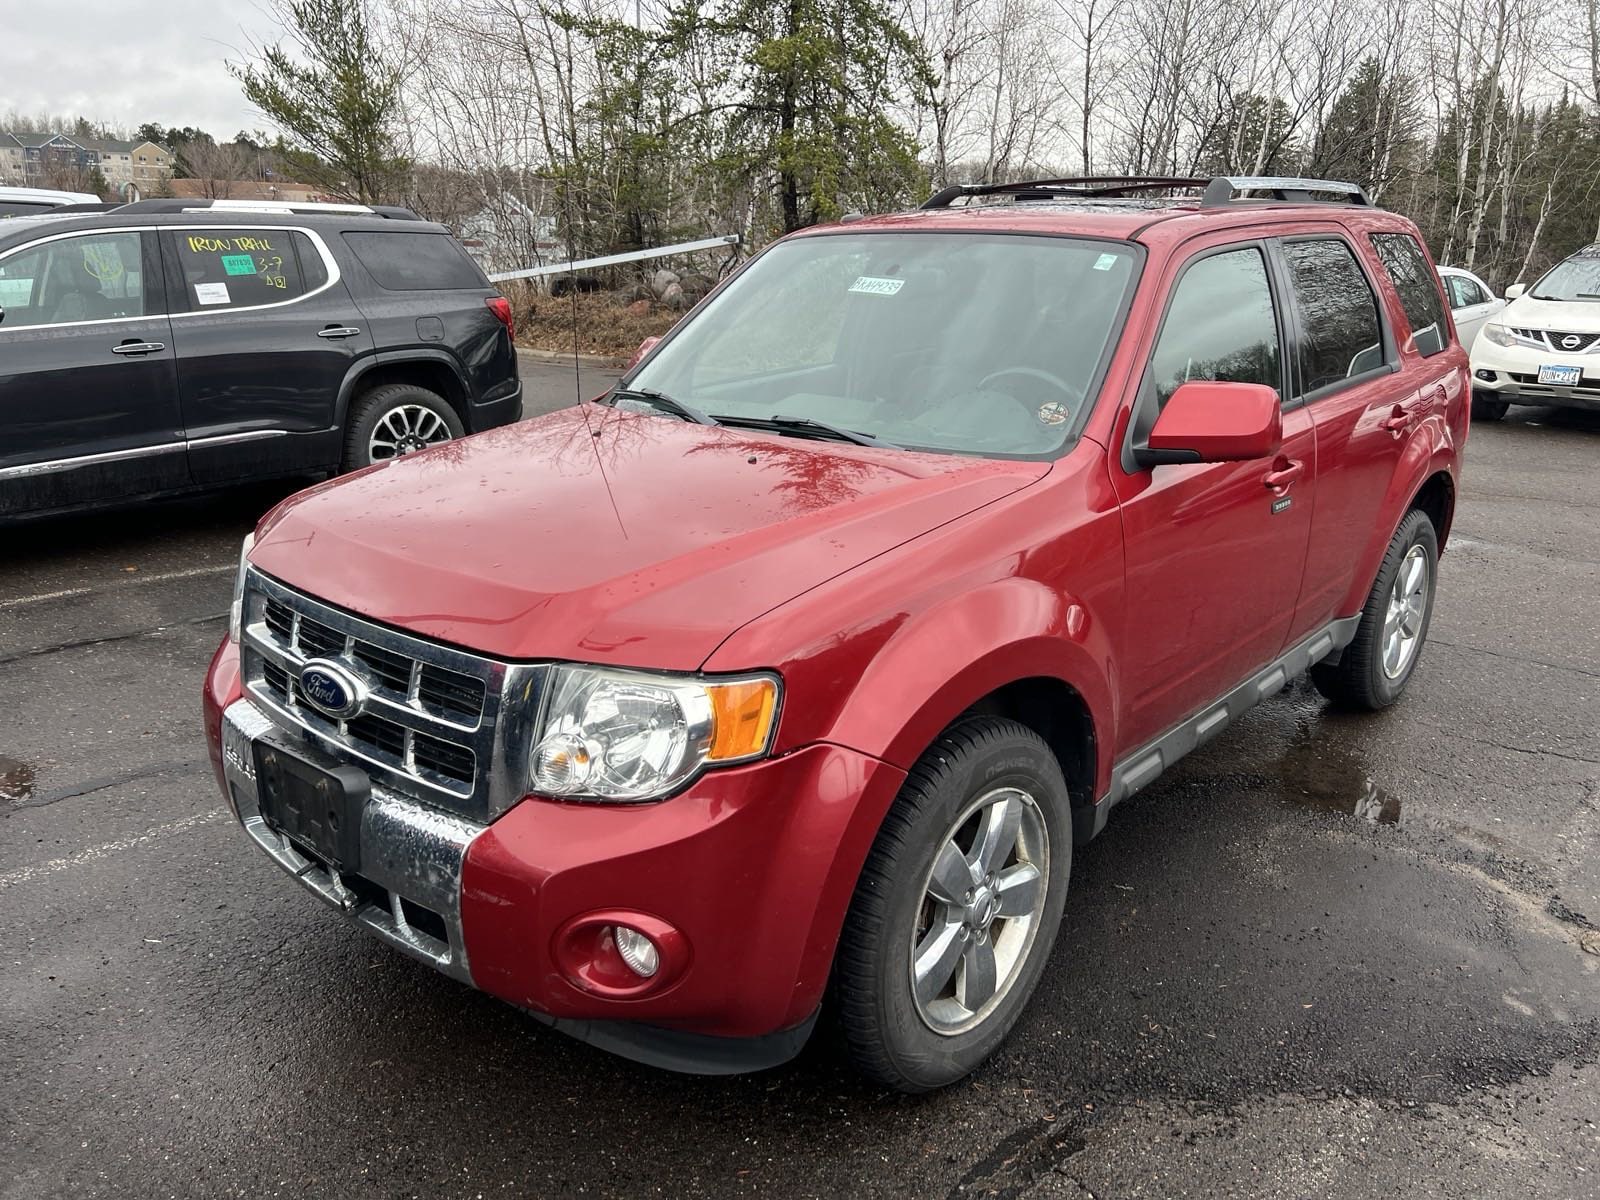 Used 2011 Ford Escape Limited with VIN 1FMCU0EG8BKA44239 for sale in Duluth, Minnesota